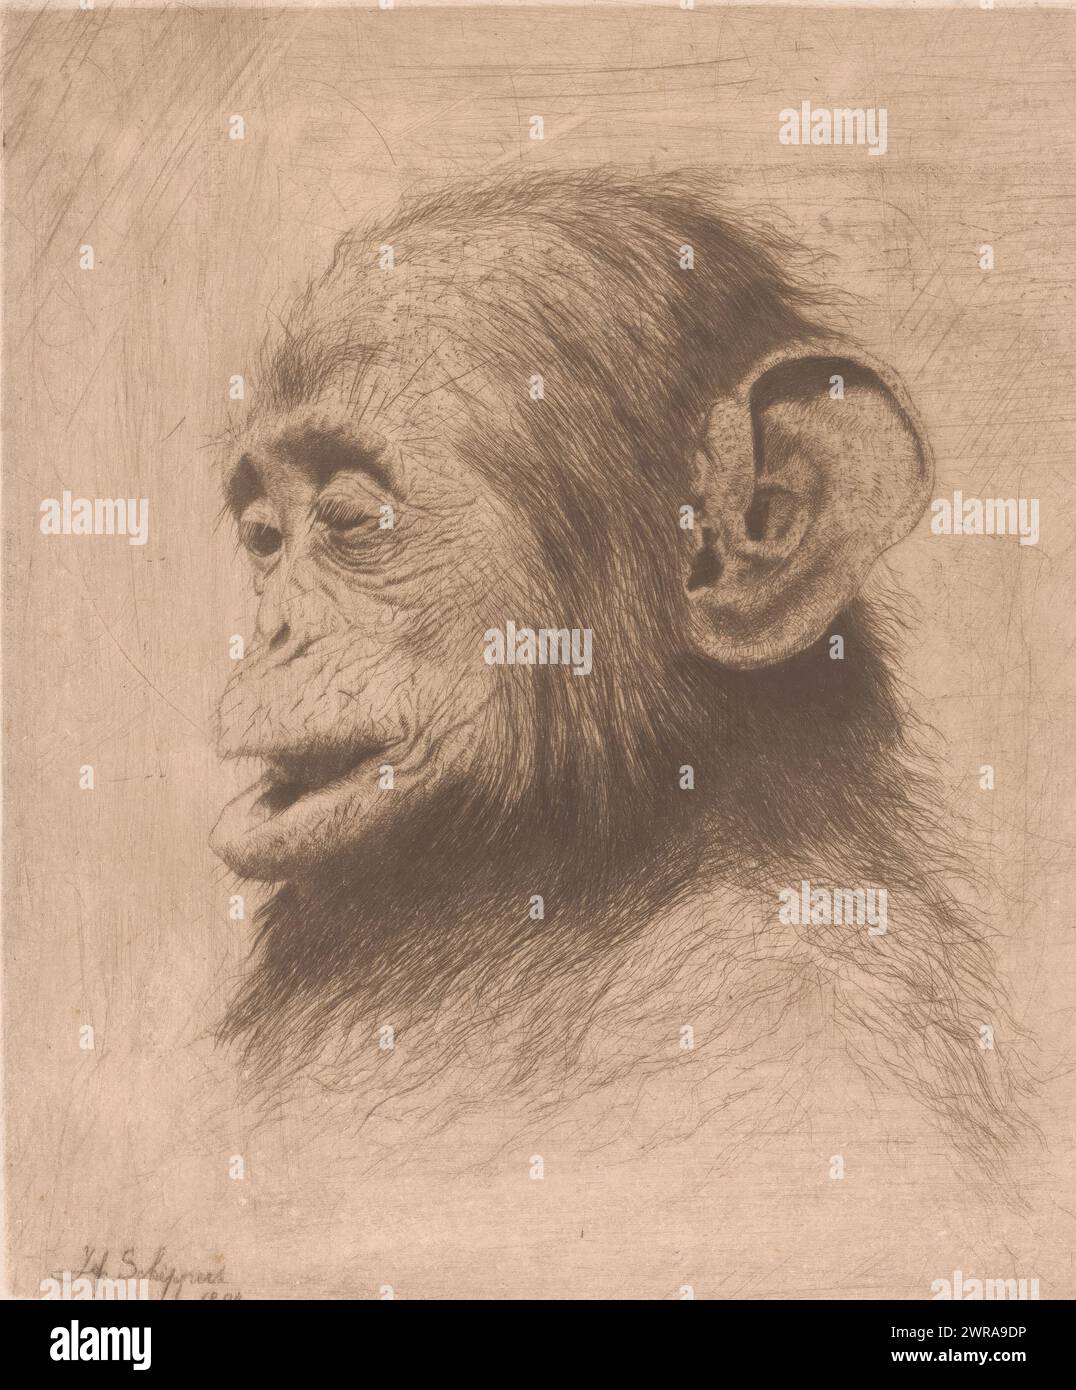 Head of a young chimpanzee, print maker: Joseph Schippers, 1894, paper, etching, height 209 mm × width 179 mm, print Stock Photo